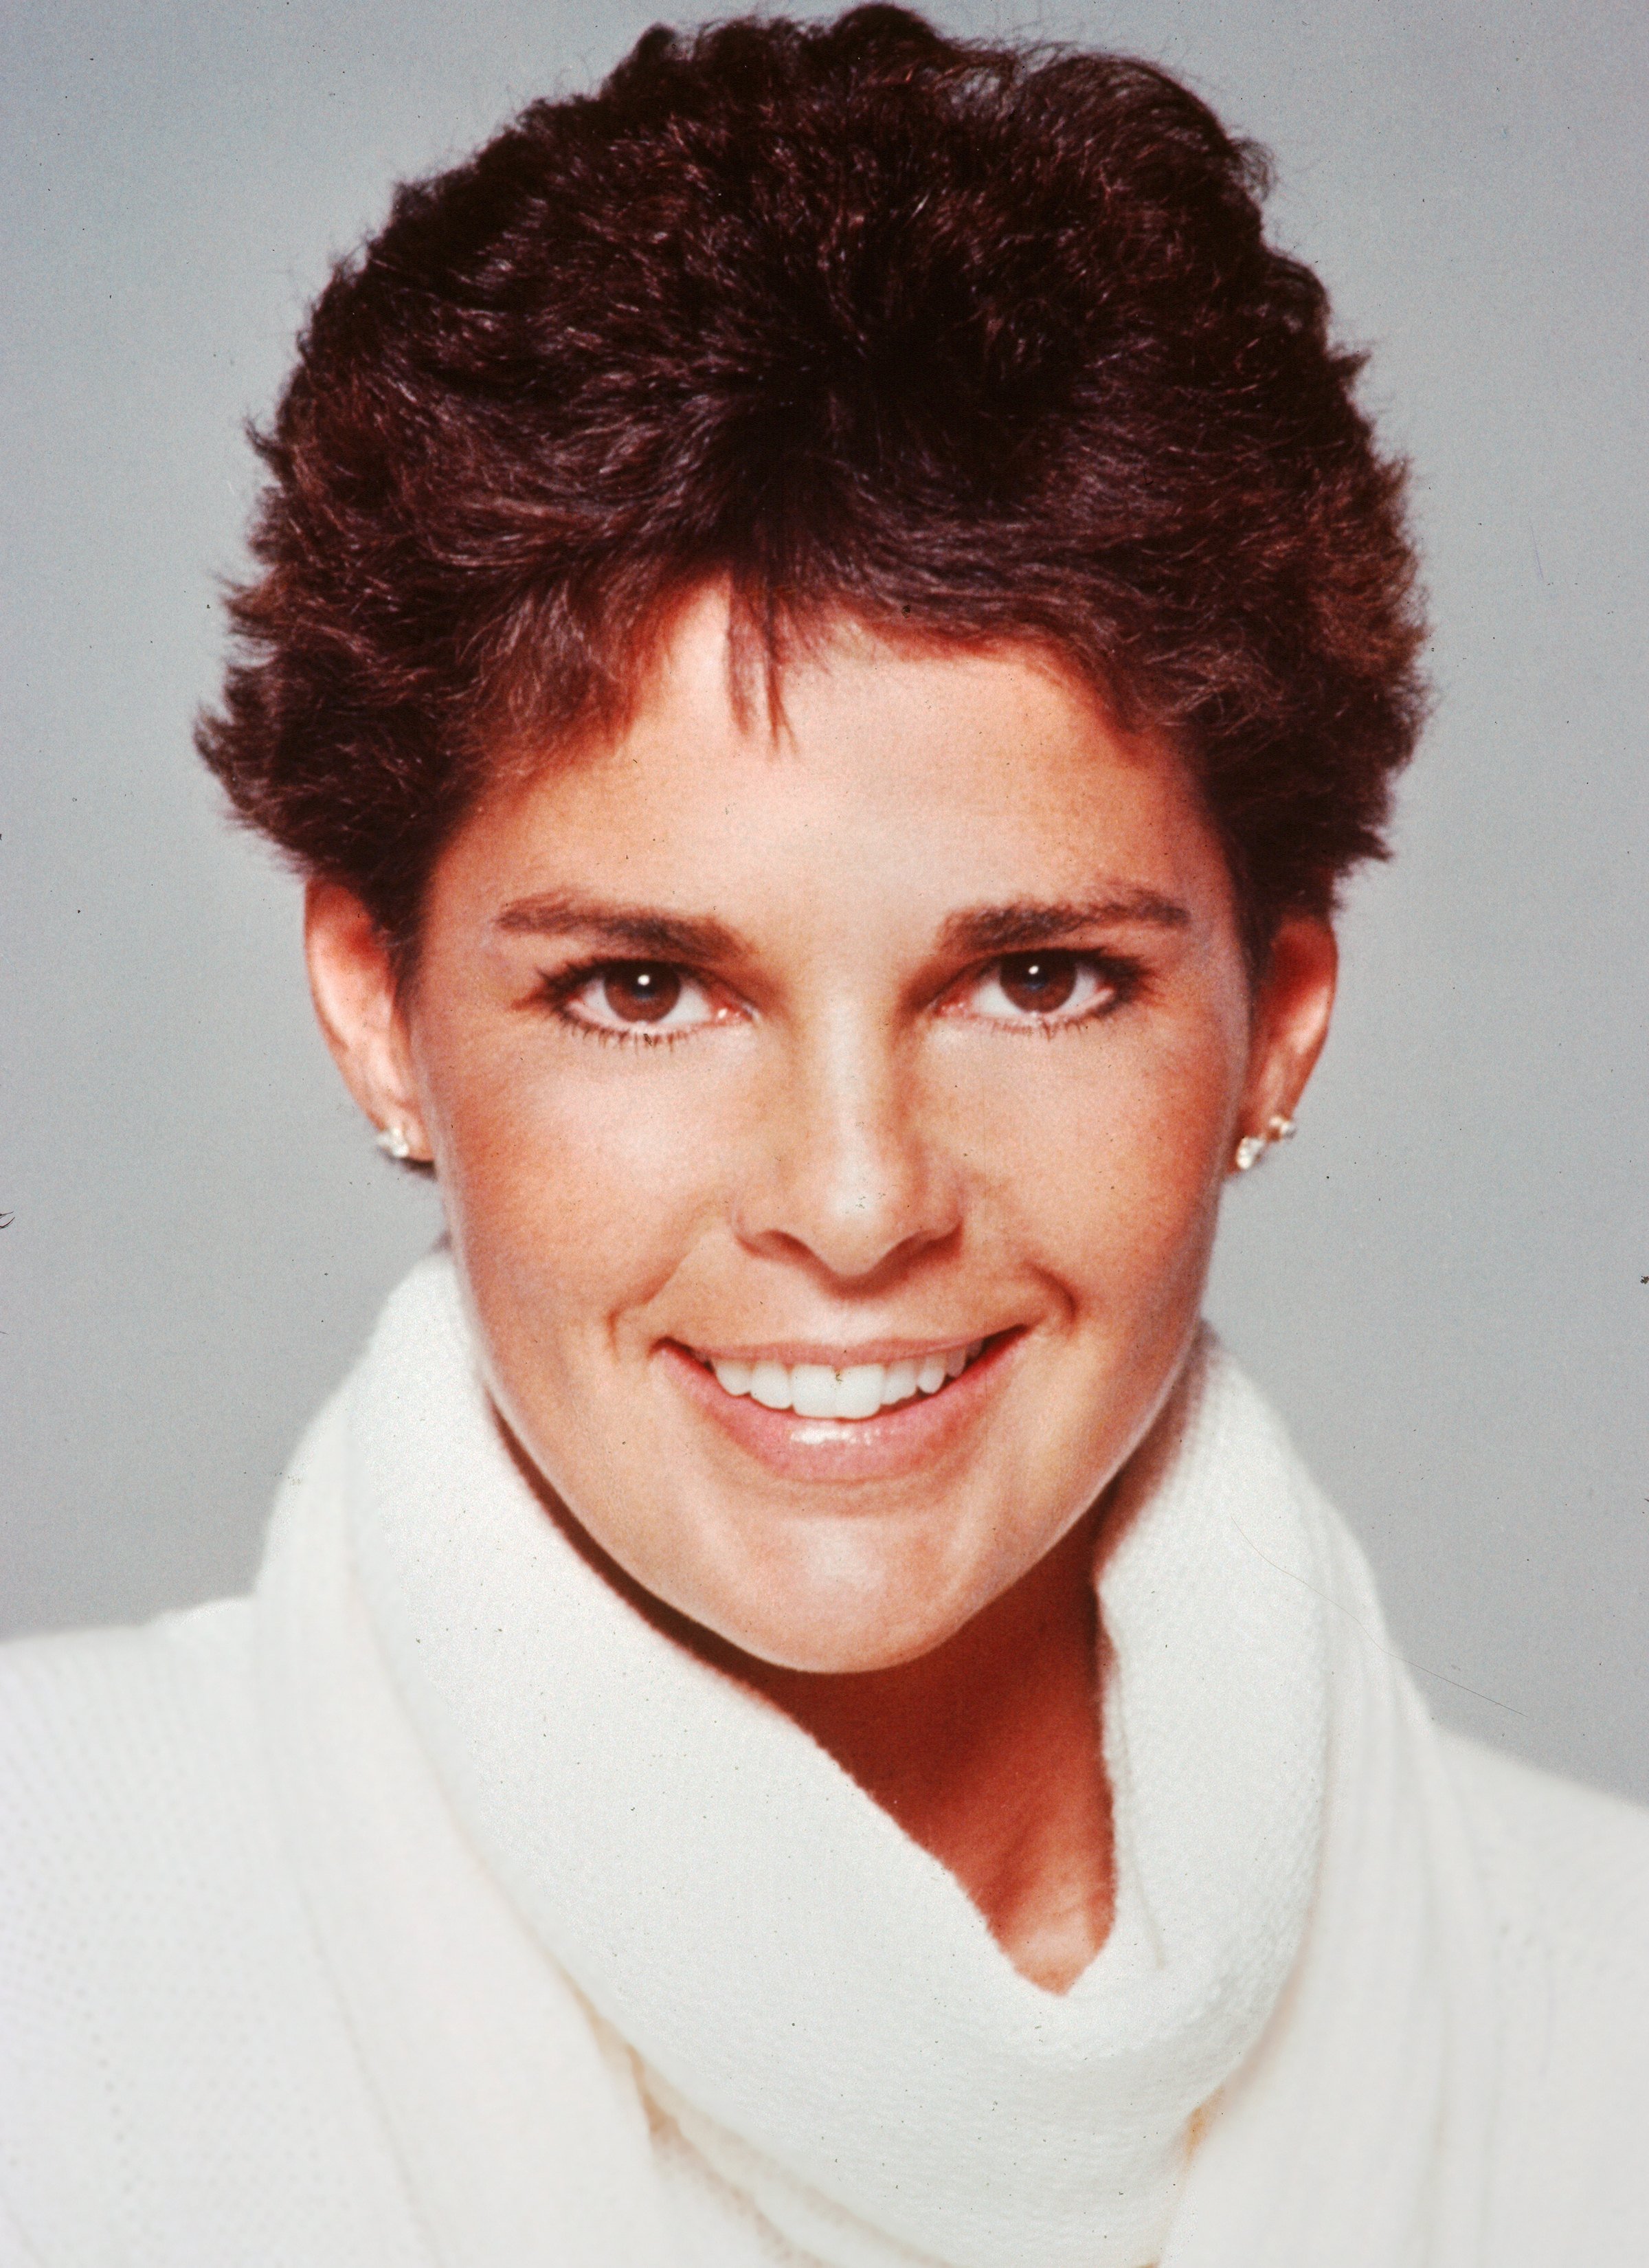 Ali MacGraw posing for a headshot in a white polo neck in 1982 in Los Angeles, California. / Source: Getty Images